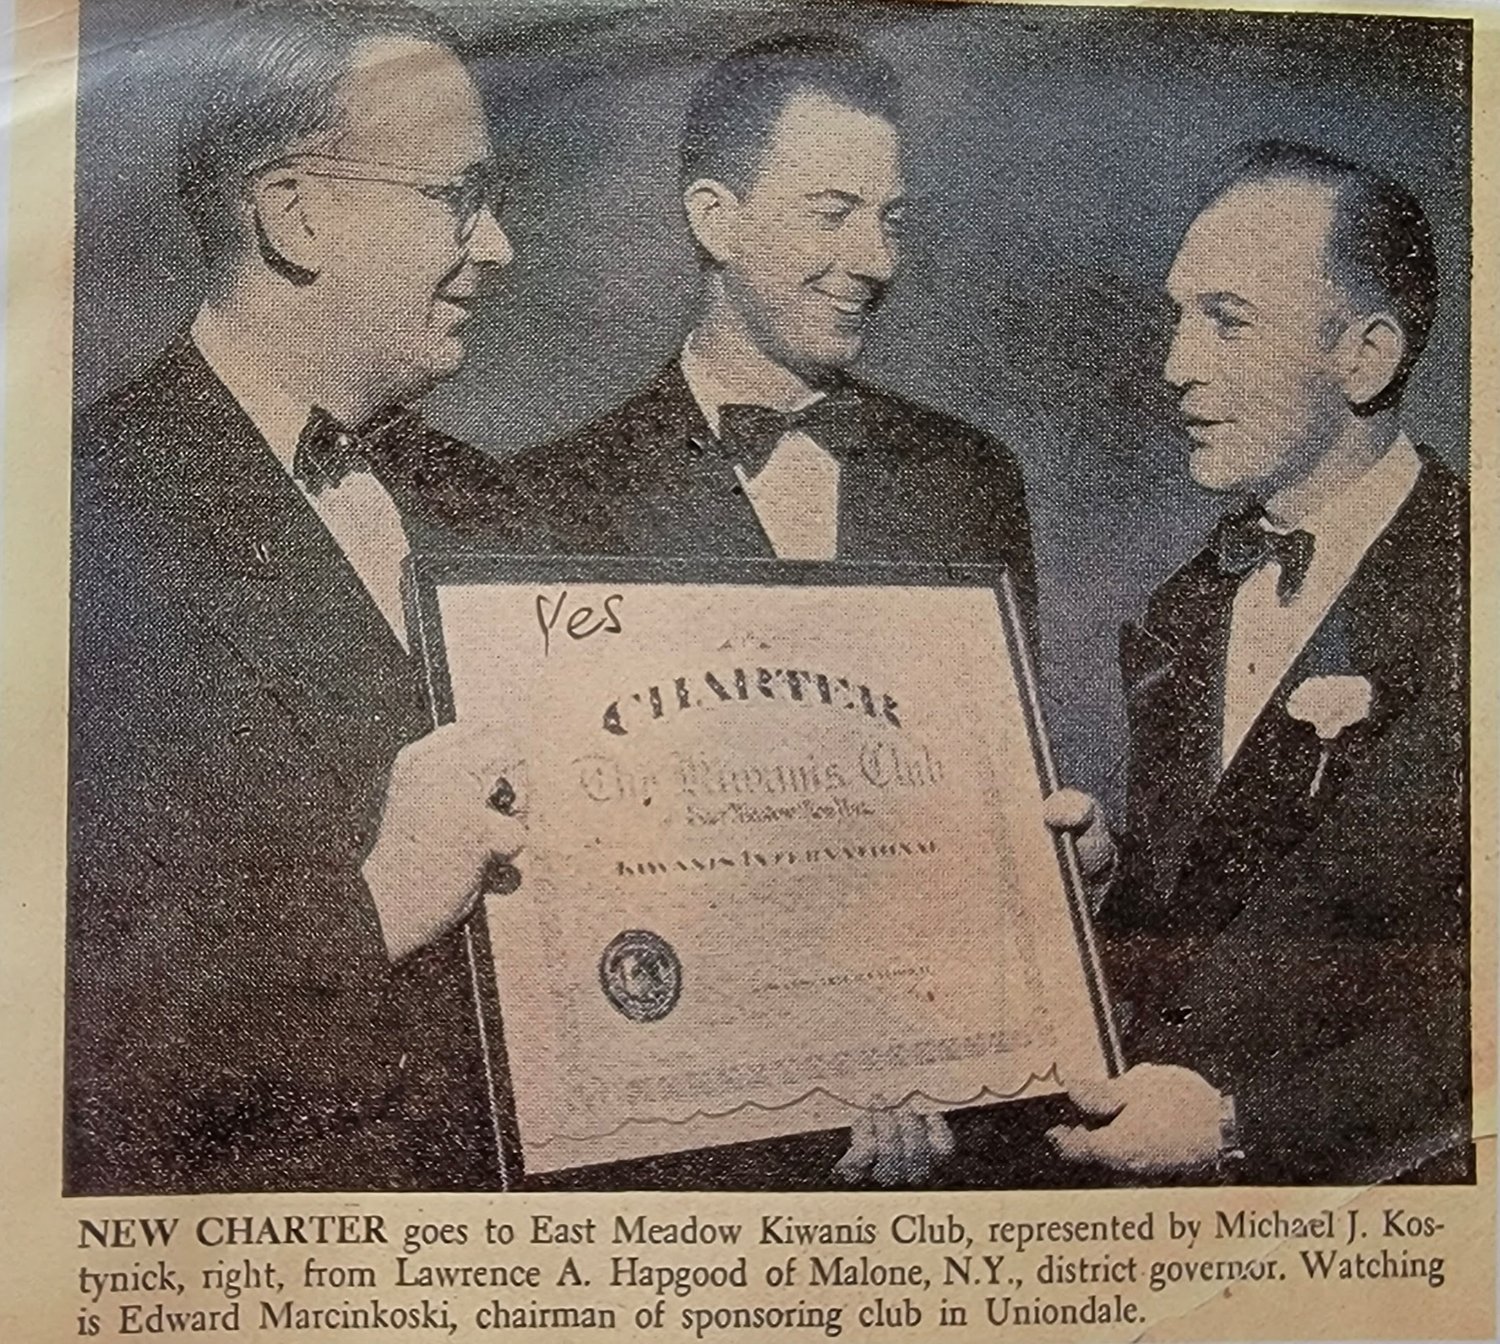 East Meadow Kiwanis was first chartered in 1952, and this year the club celebrated its 70th anniversary.